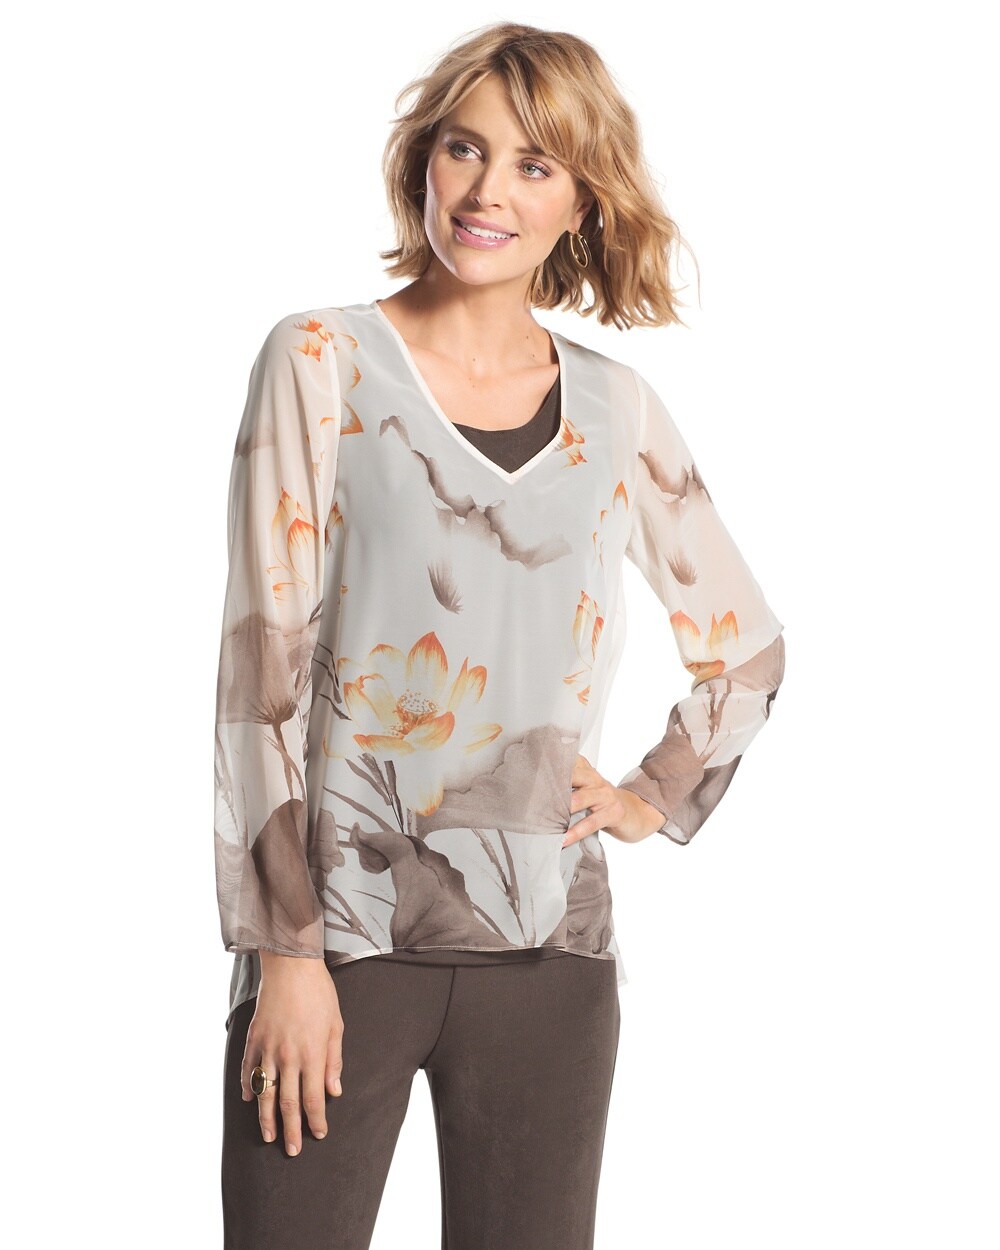 Travelers Collection Sheer Floral Top